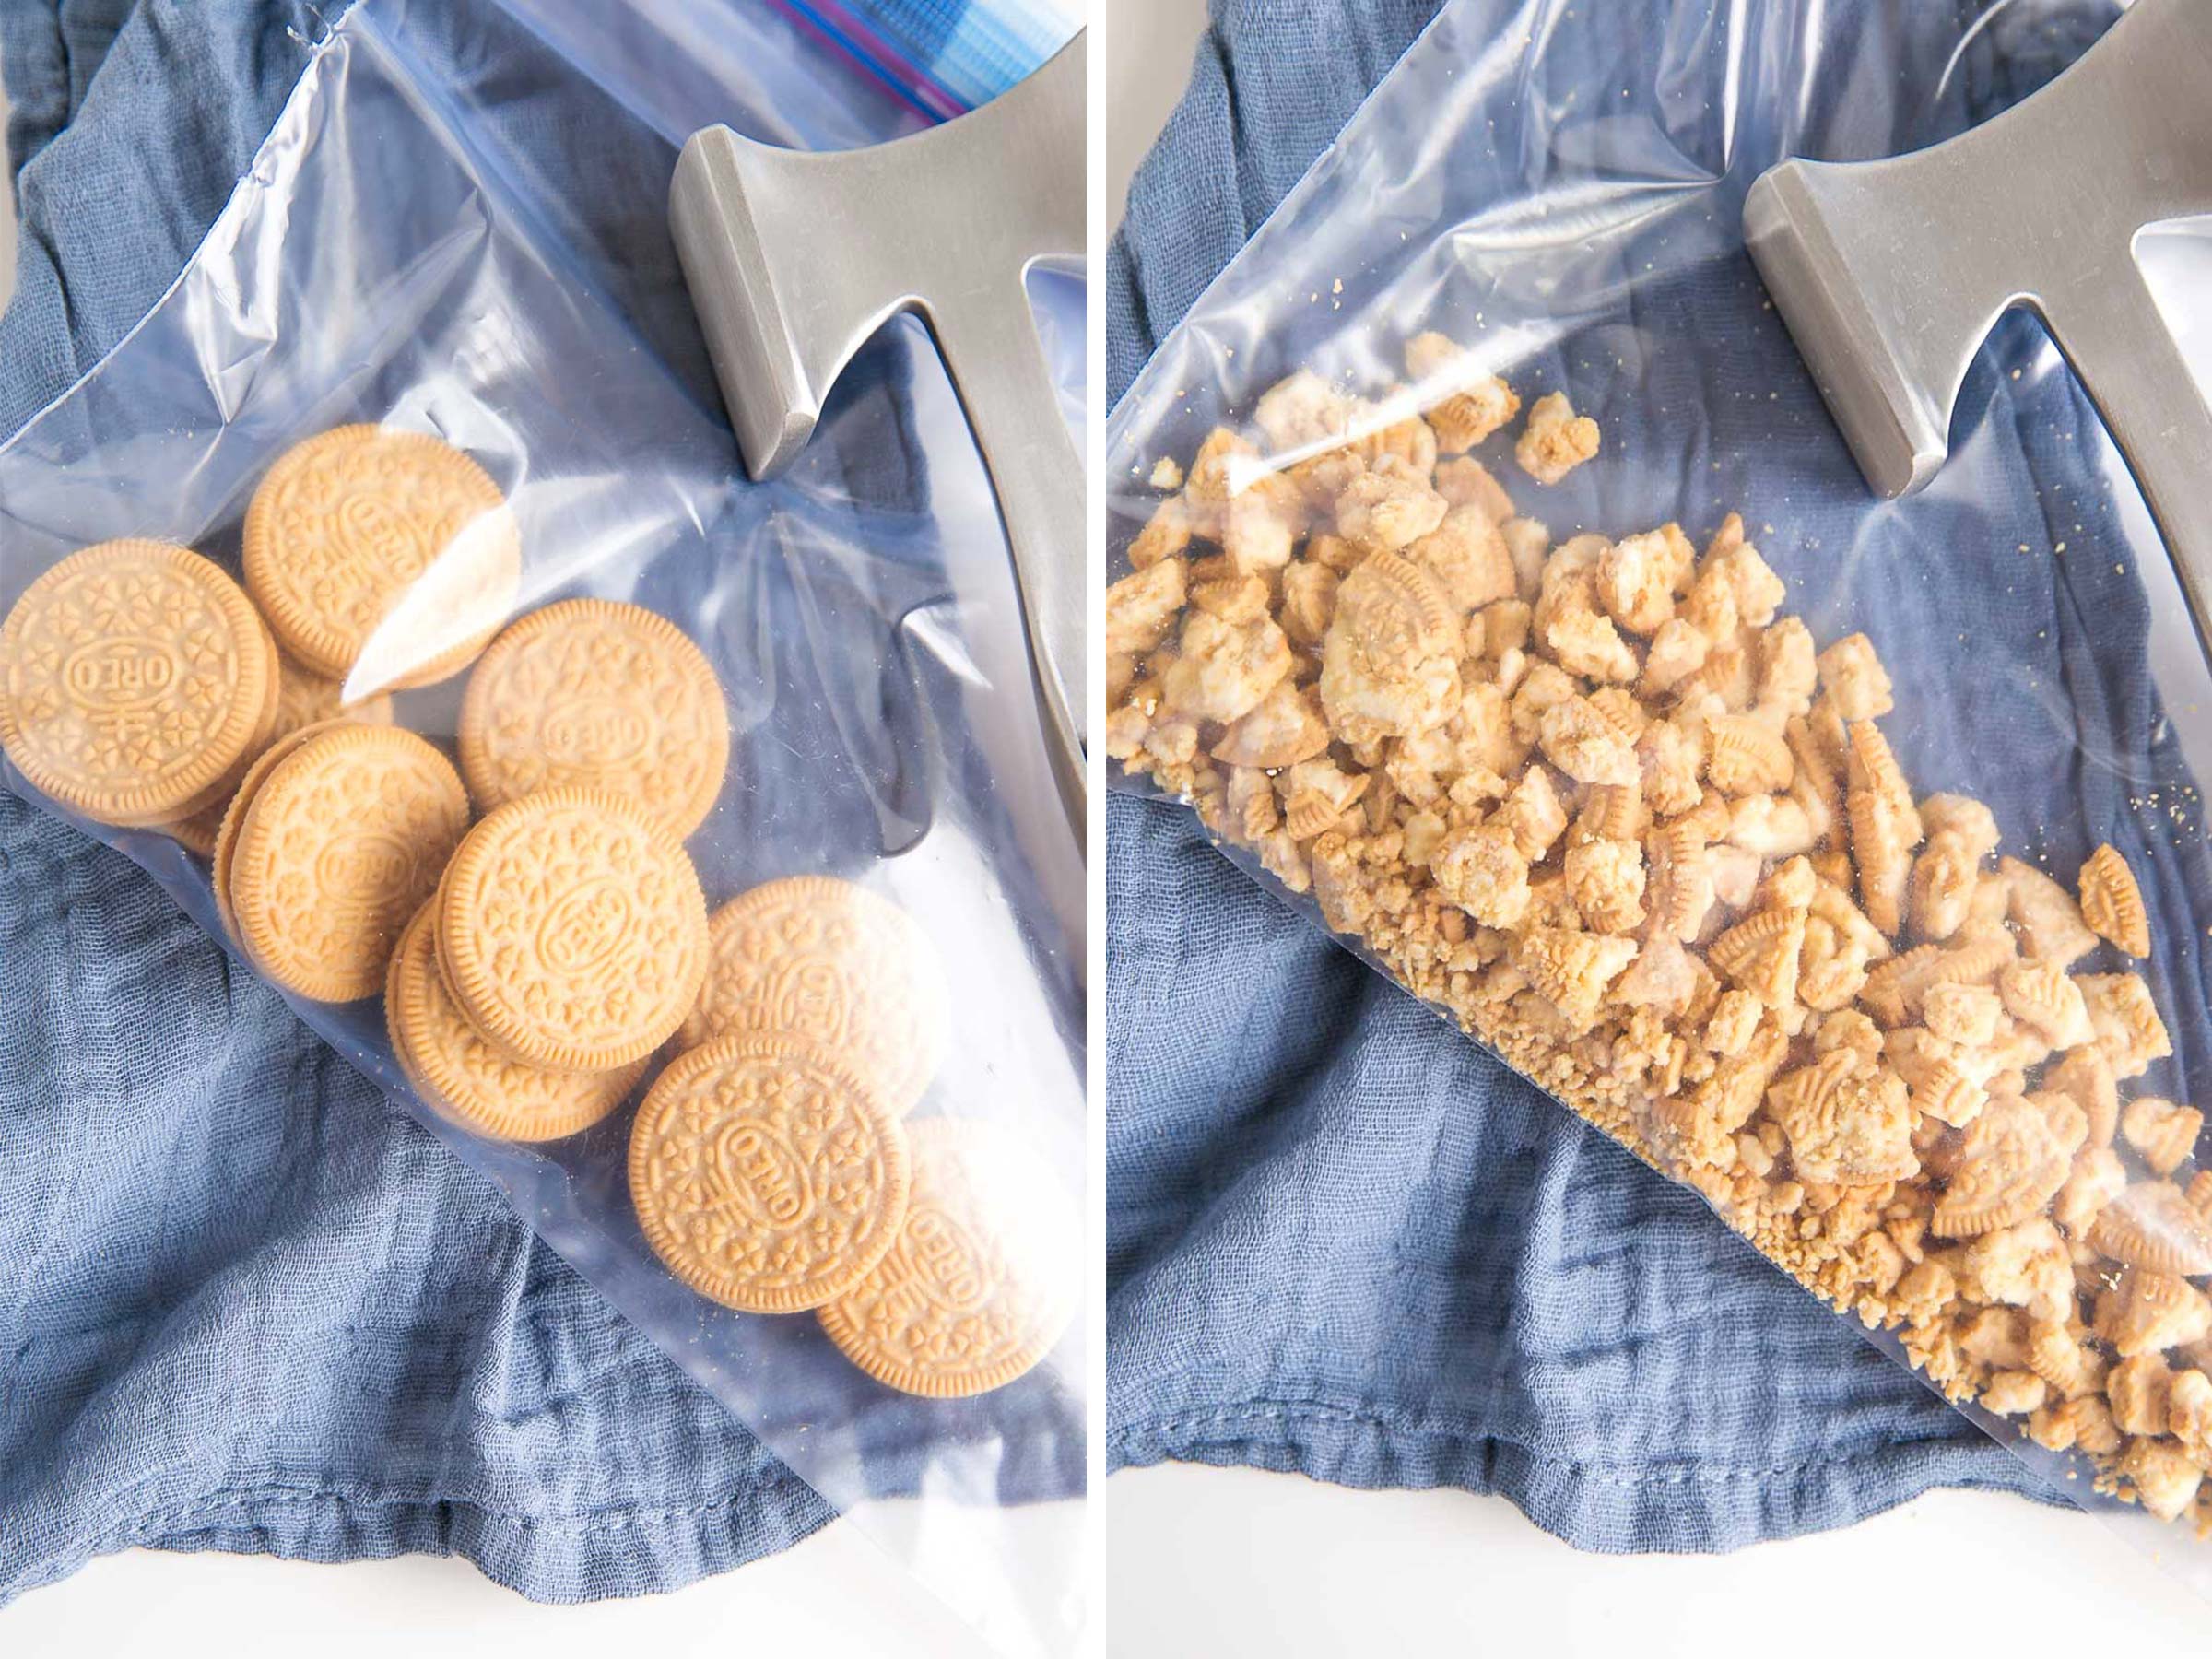 Side by side of cookies in a ziploc bag - whole and crushed.